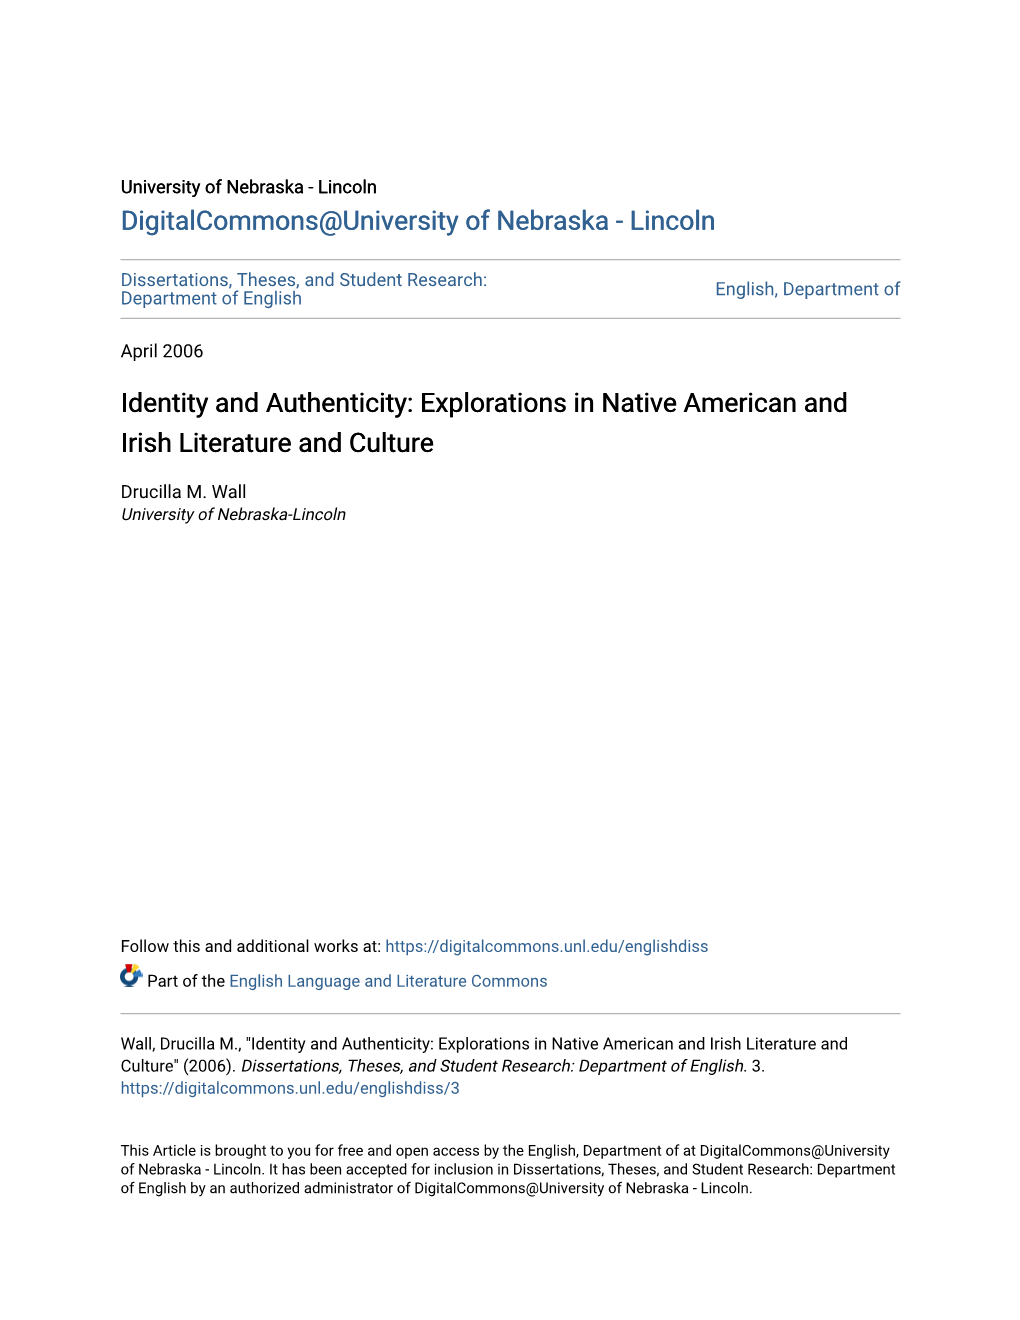 Identity and Authenticity: Explorations in Native American and Irish Literature and Culture